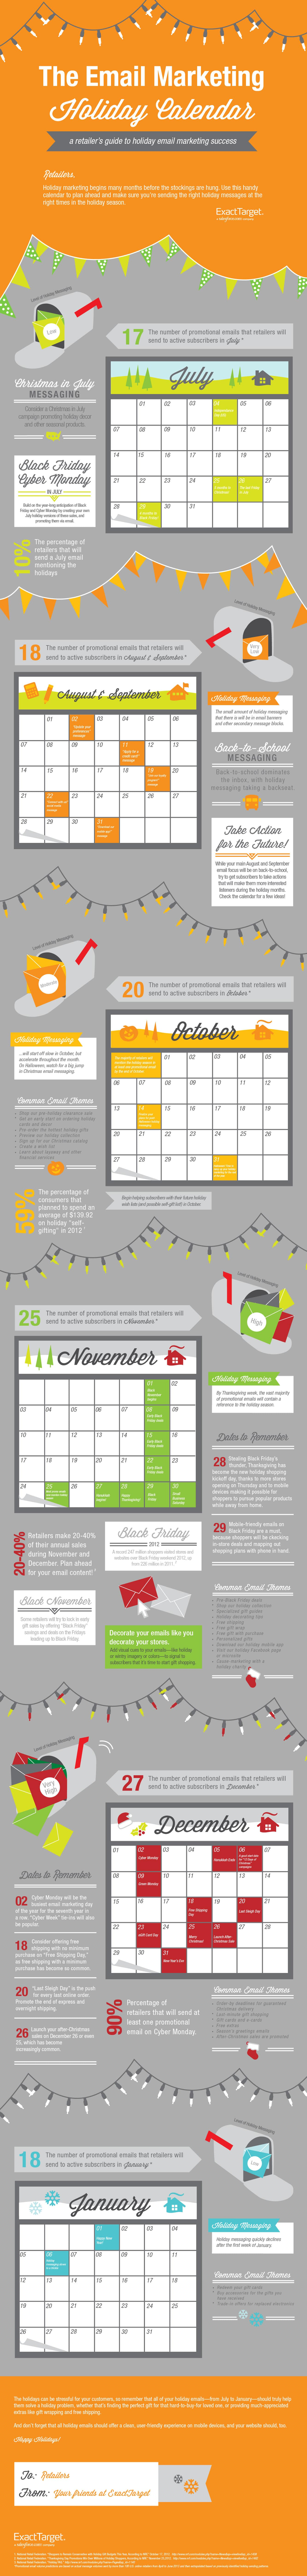 Holidays In August: A Holiday Email Marketing Schedule [Infographic]